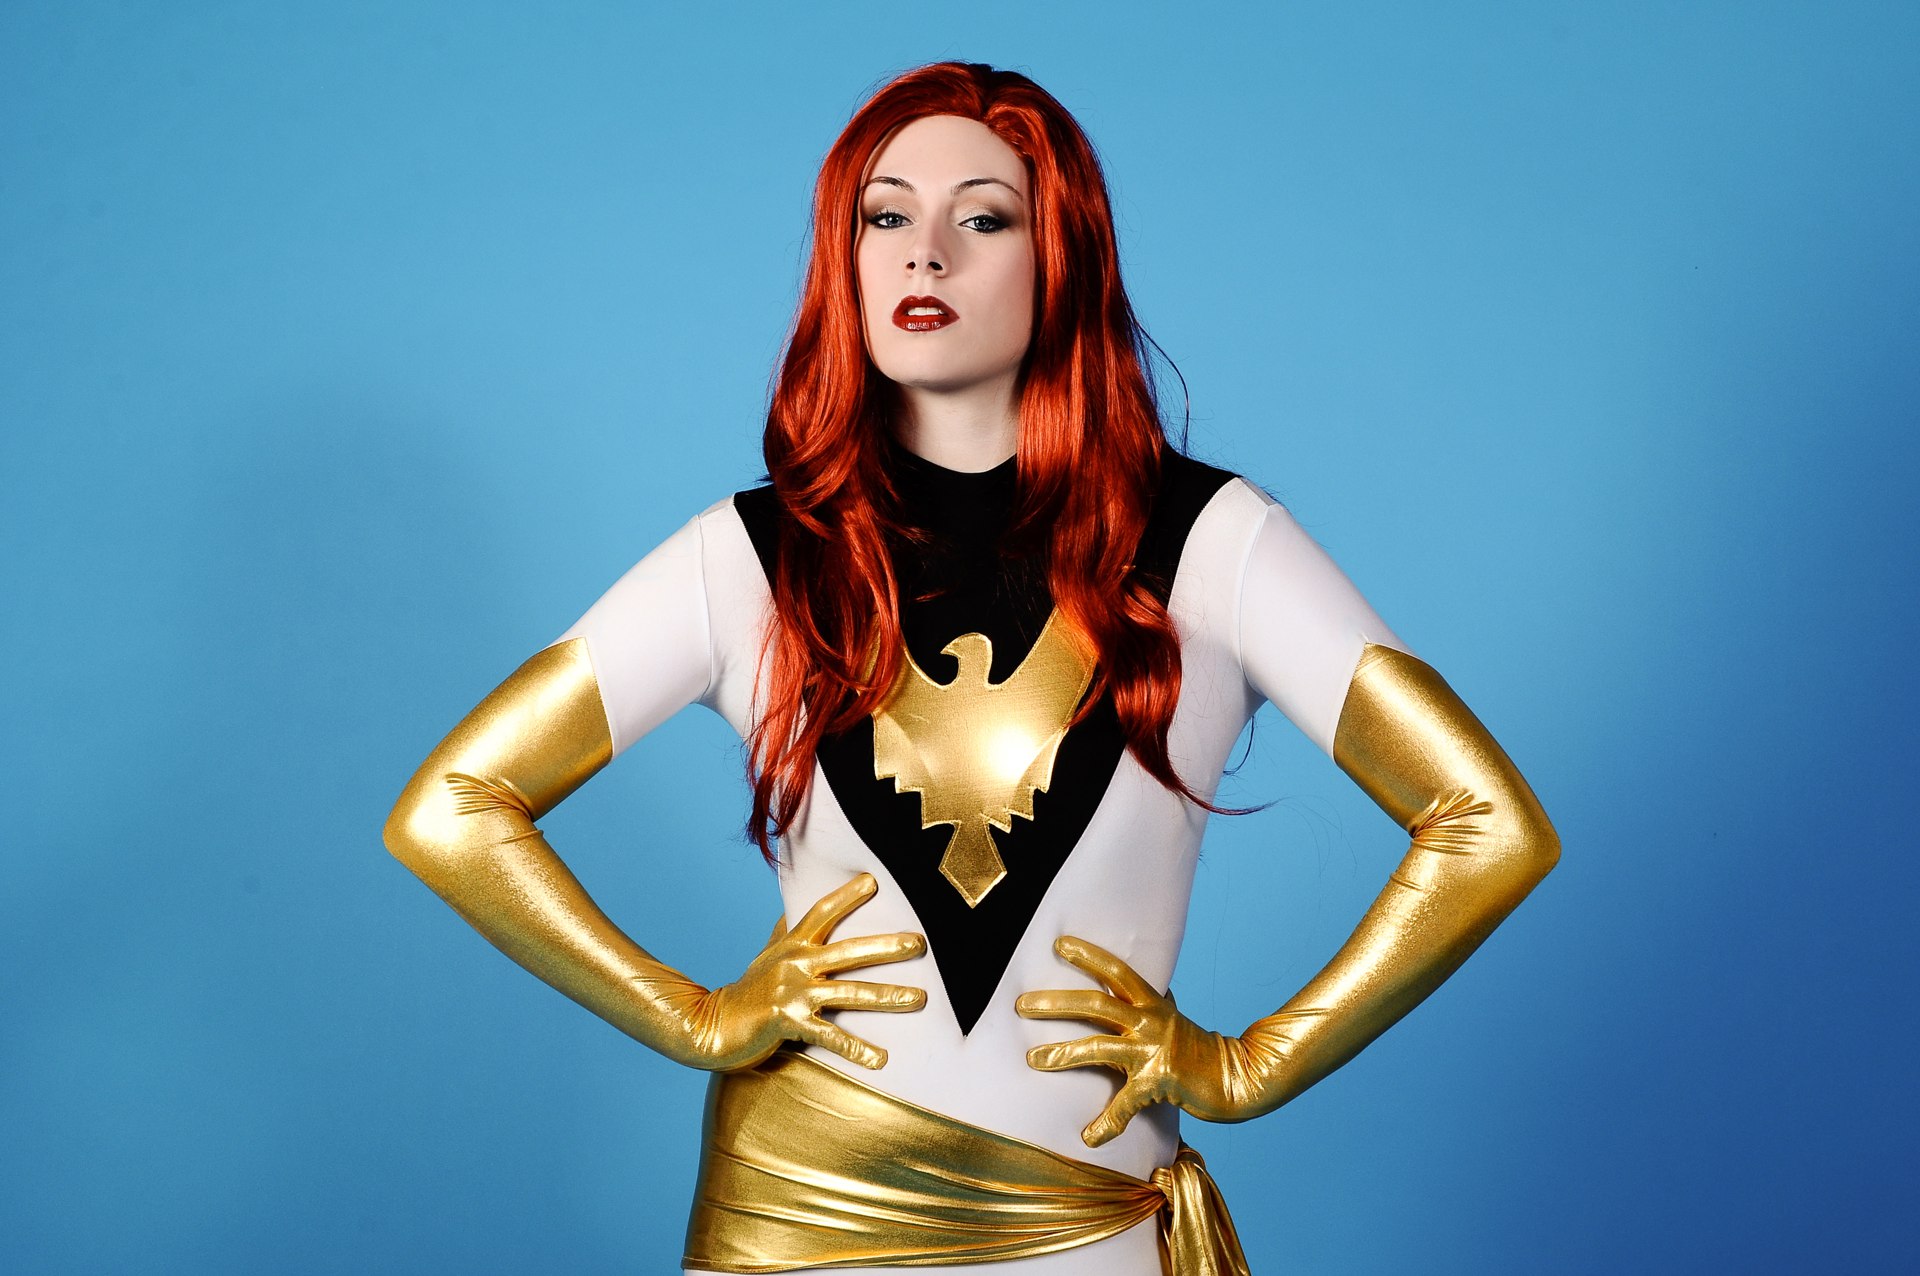 Jean Grey Images White Phoenix Of The Crown Wallpaper - White Crown Phoenix Cosplay , HD Wallpaper & Backgrounds